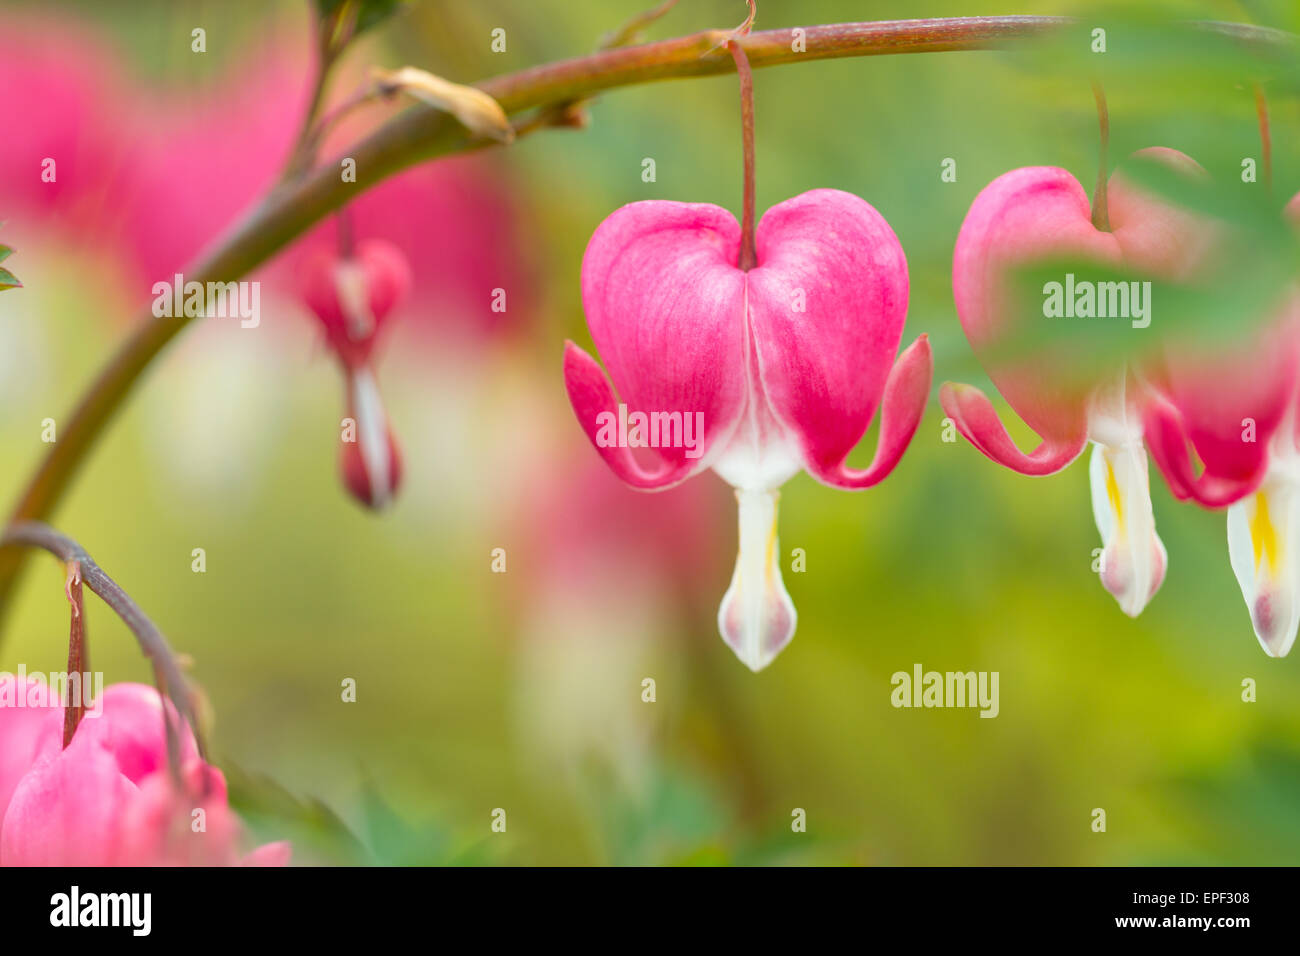 Macro photo of hearted-shaped pink flower blossoms Stock Photo